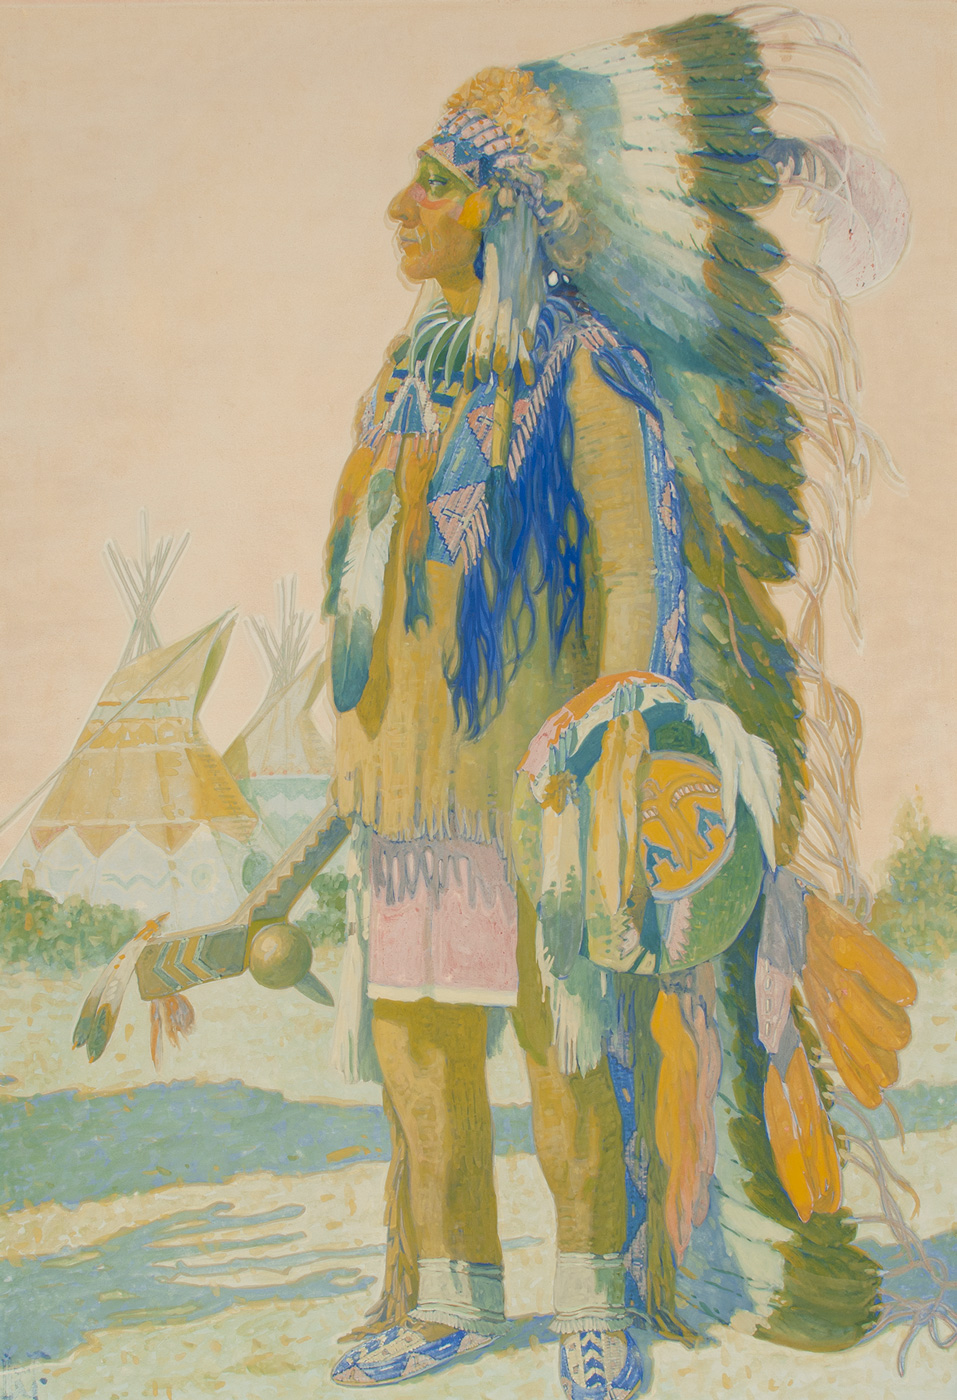 A full length, side view portrait of a Ponca man in tribal clothing.